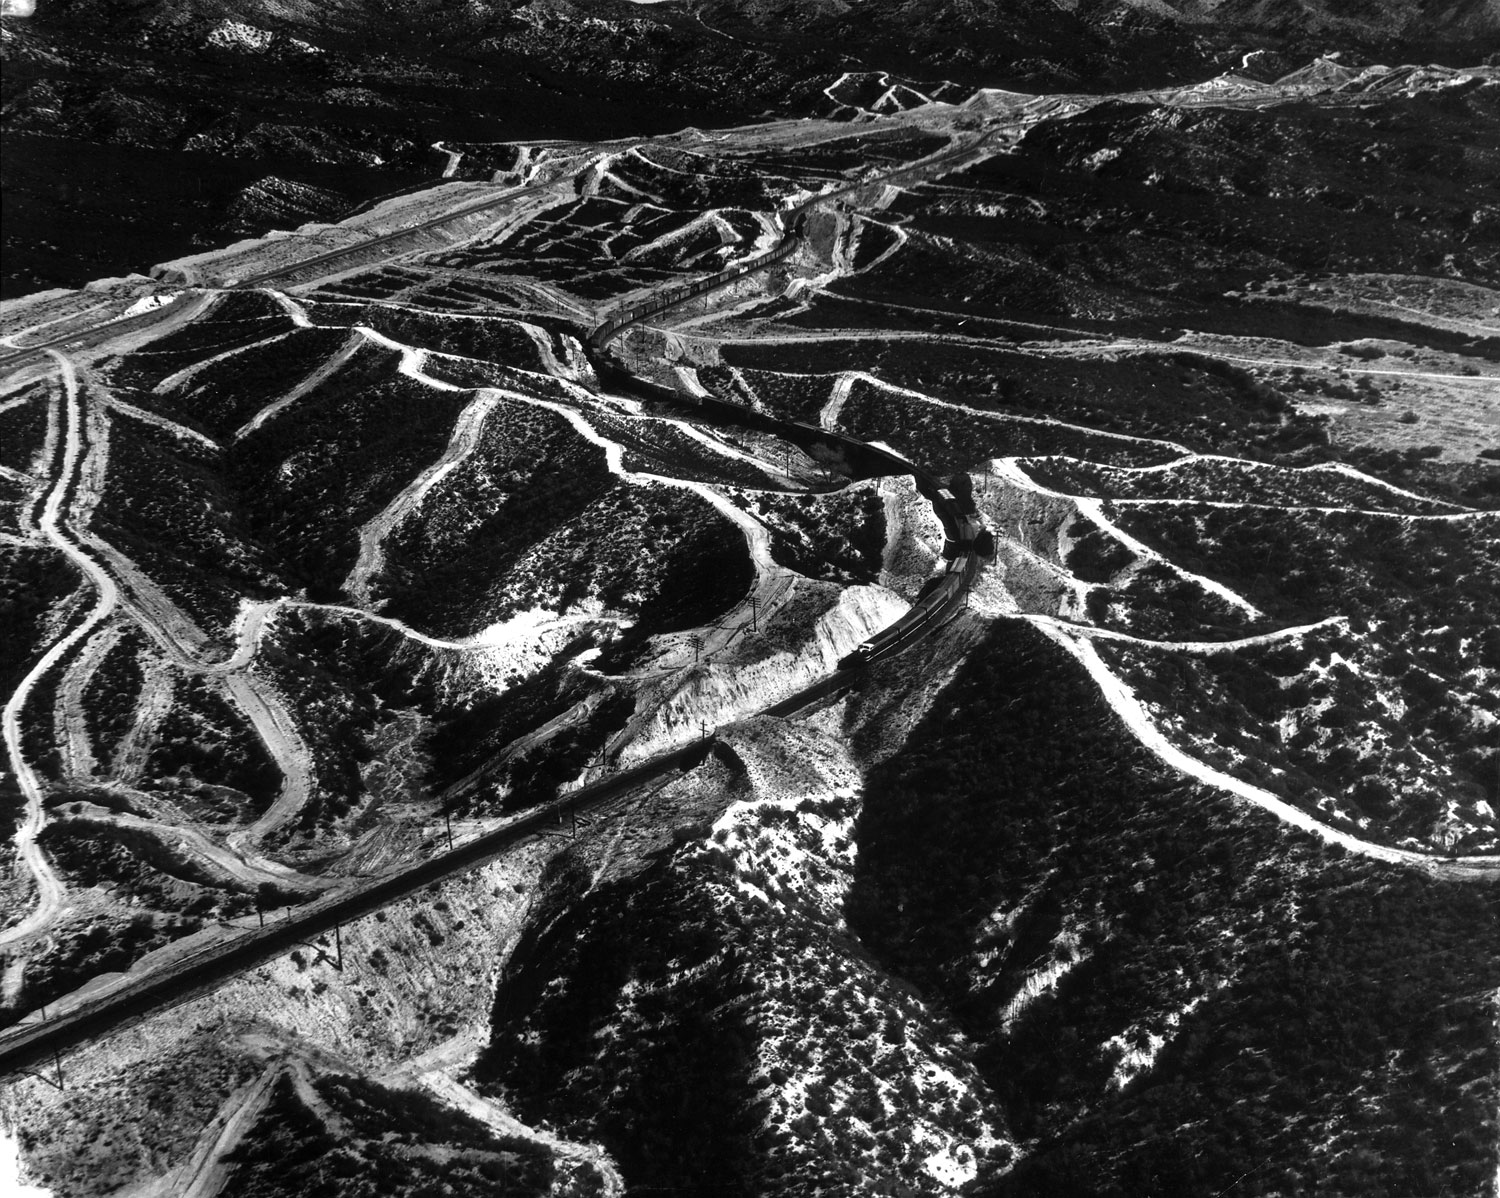 Freight train traveling through the El Cajon Pass outside San Diego, Calif., photographed from a helicopter, 1952.